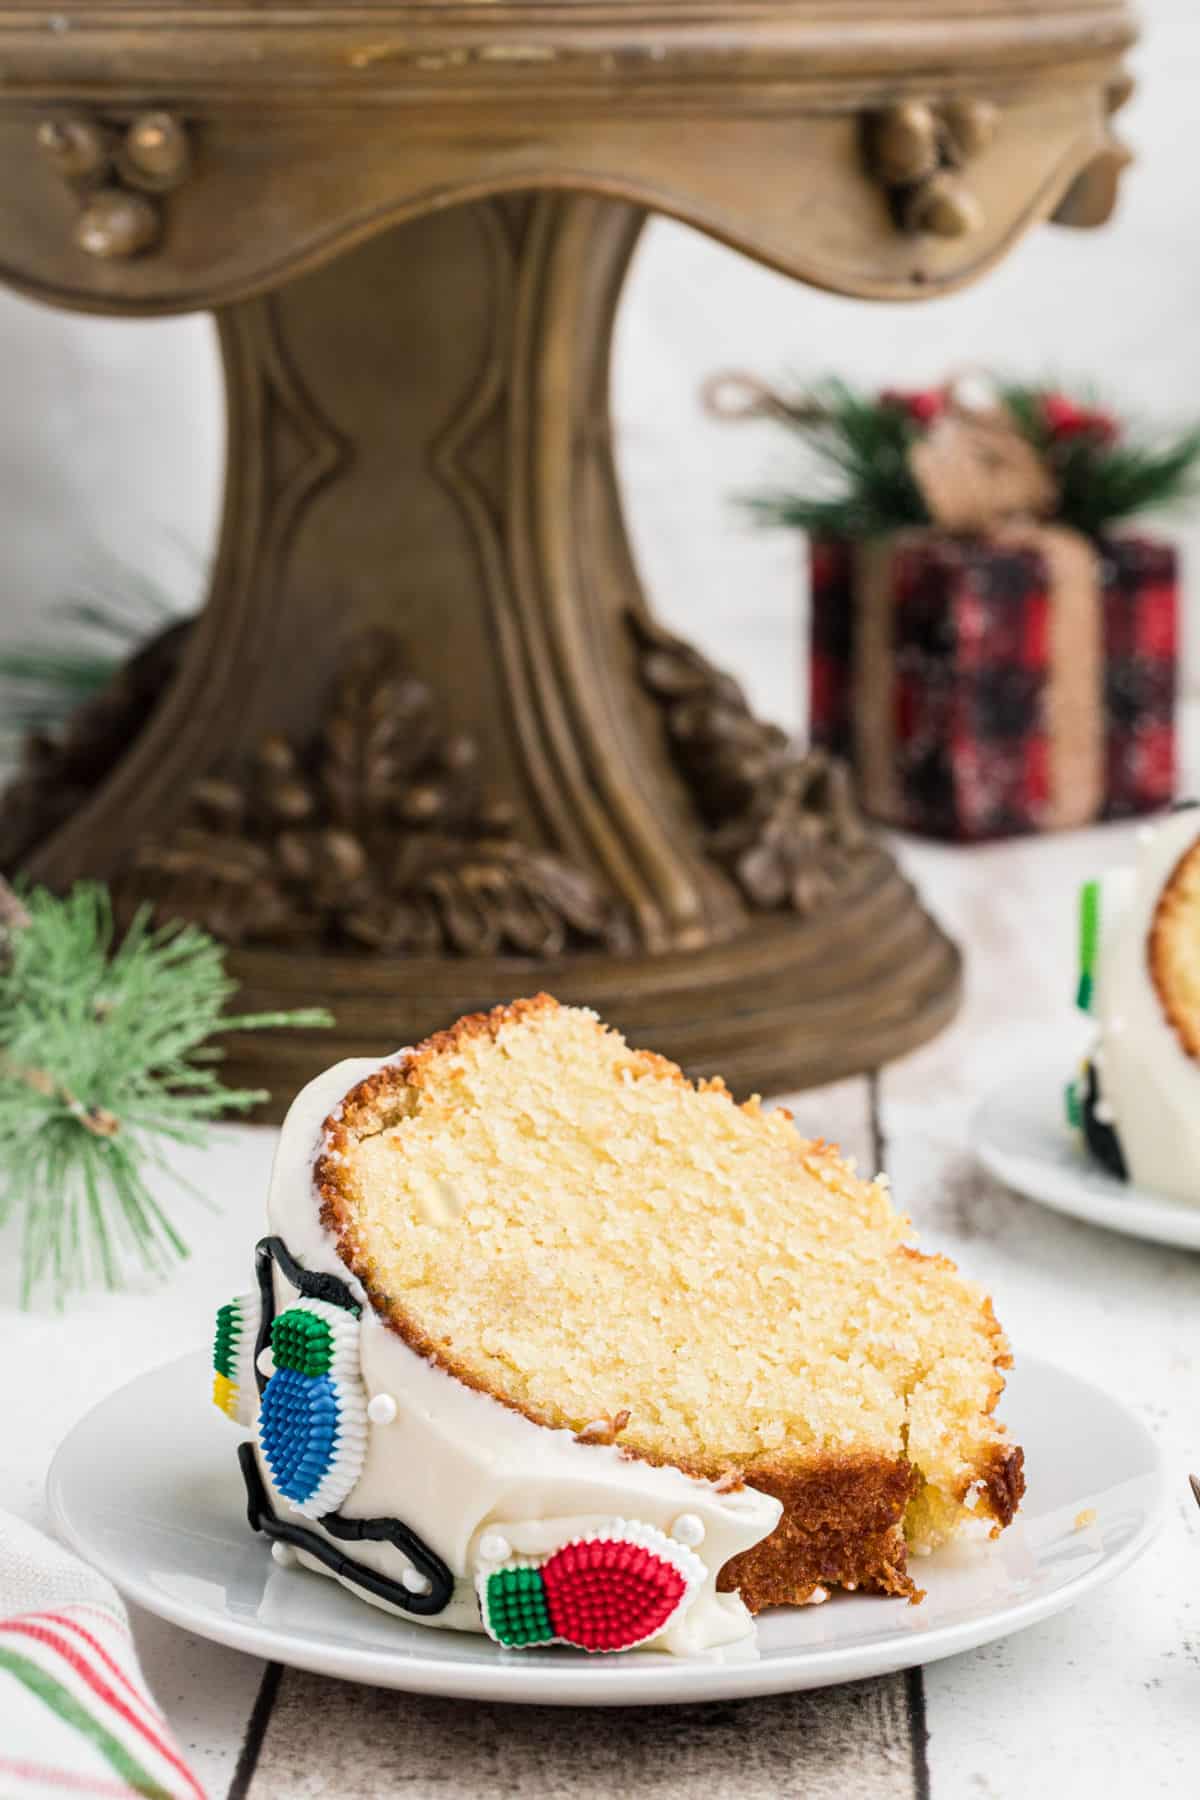 A slice of Christmas Bundt Cake in front of a cake stand.